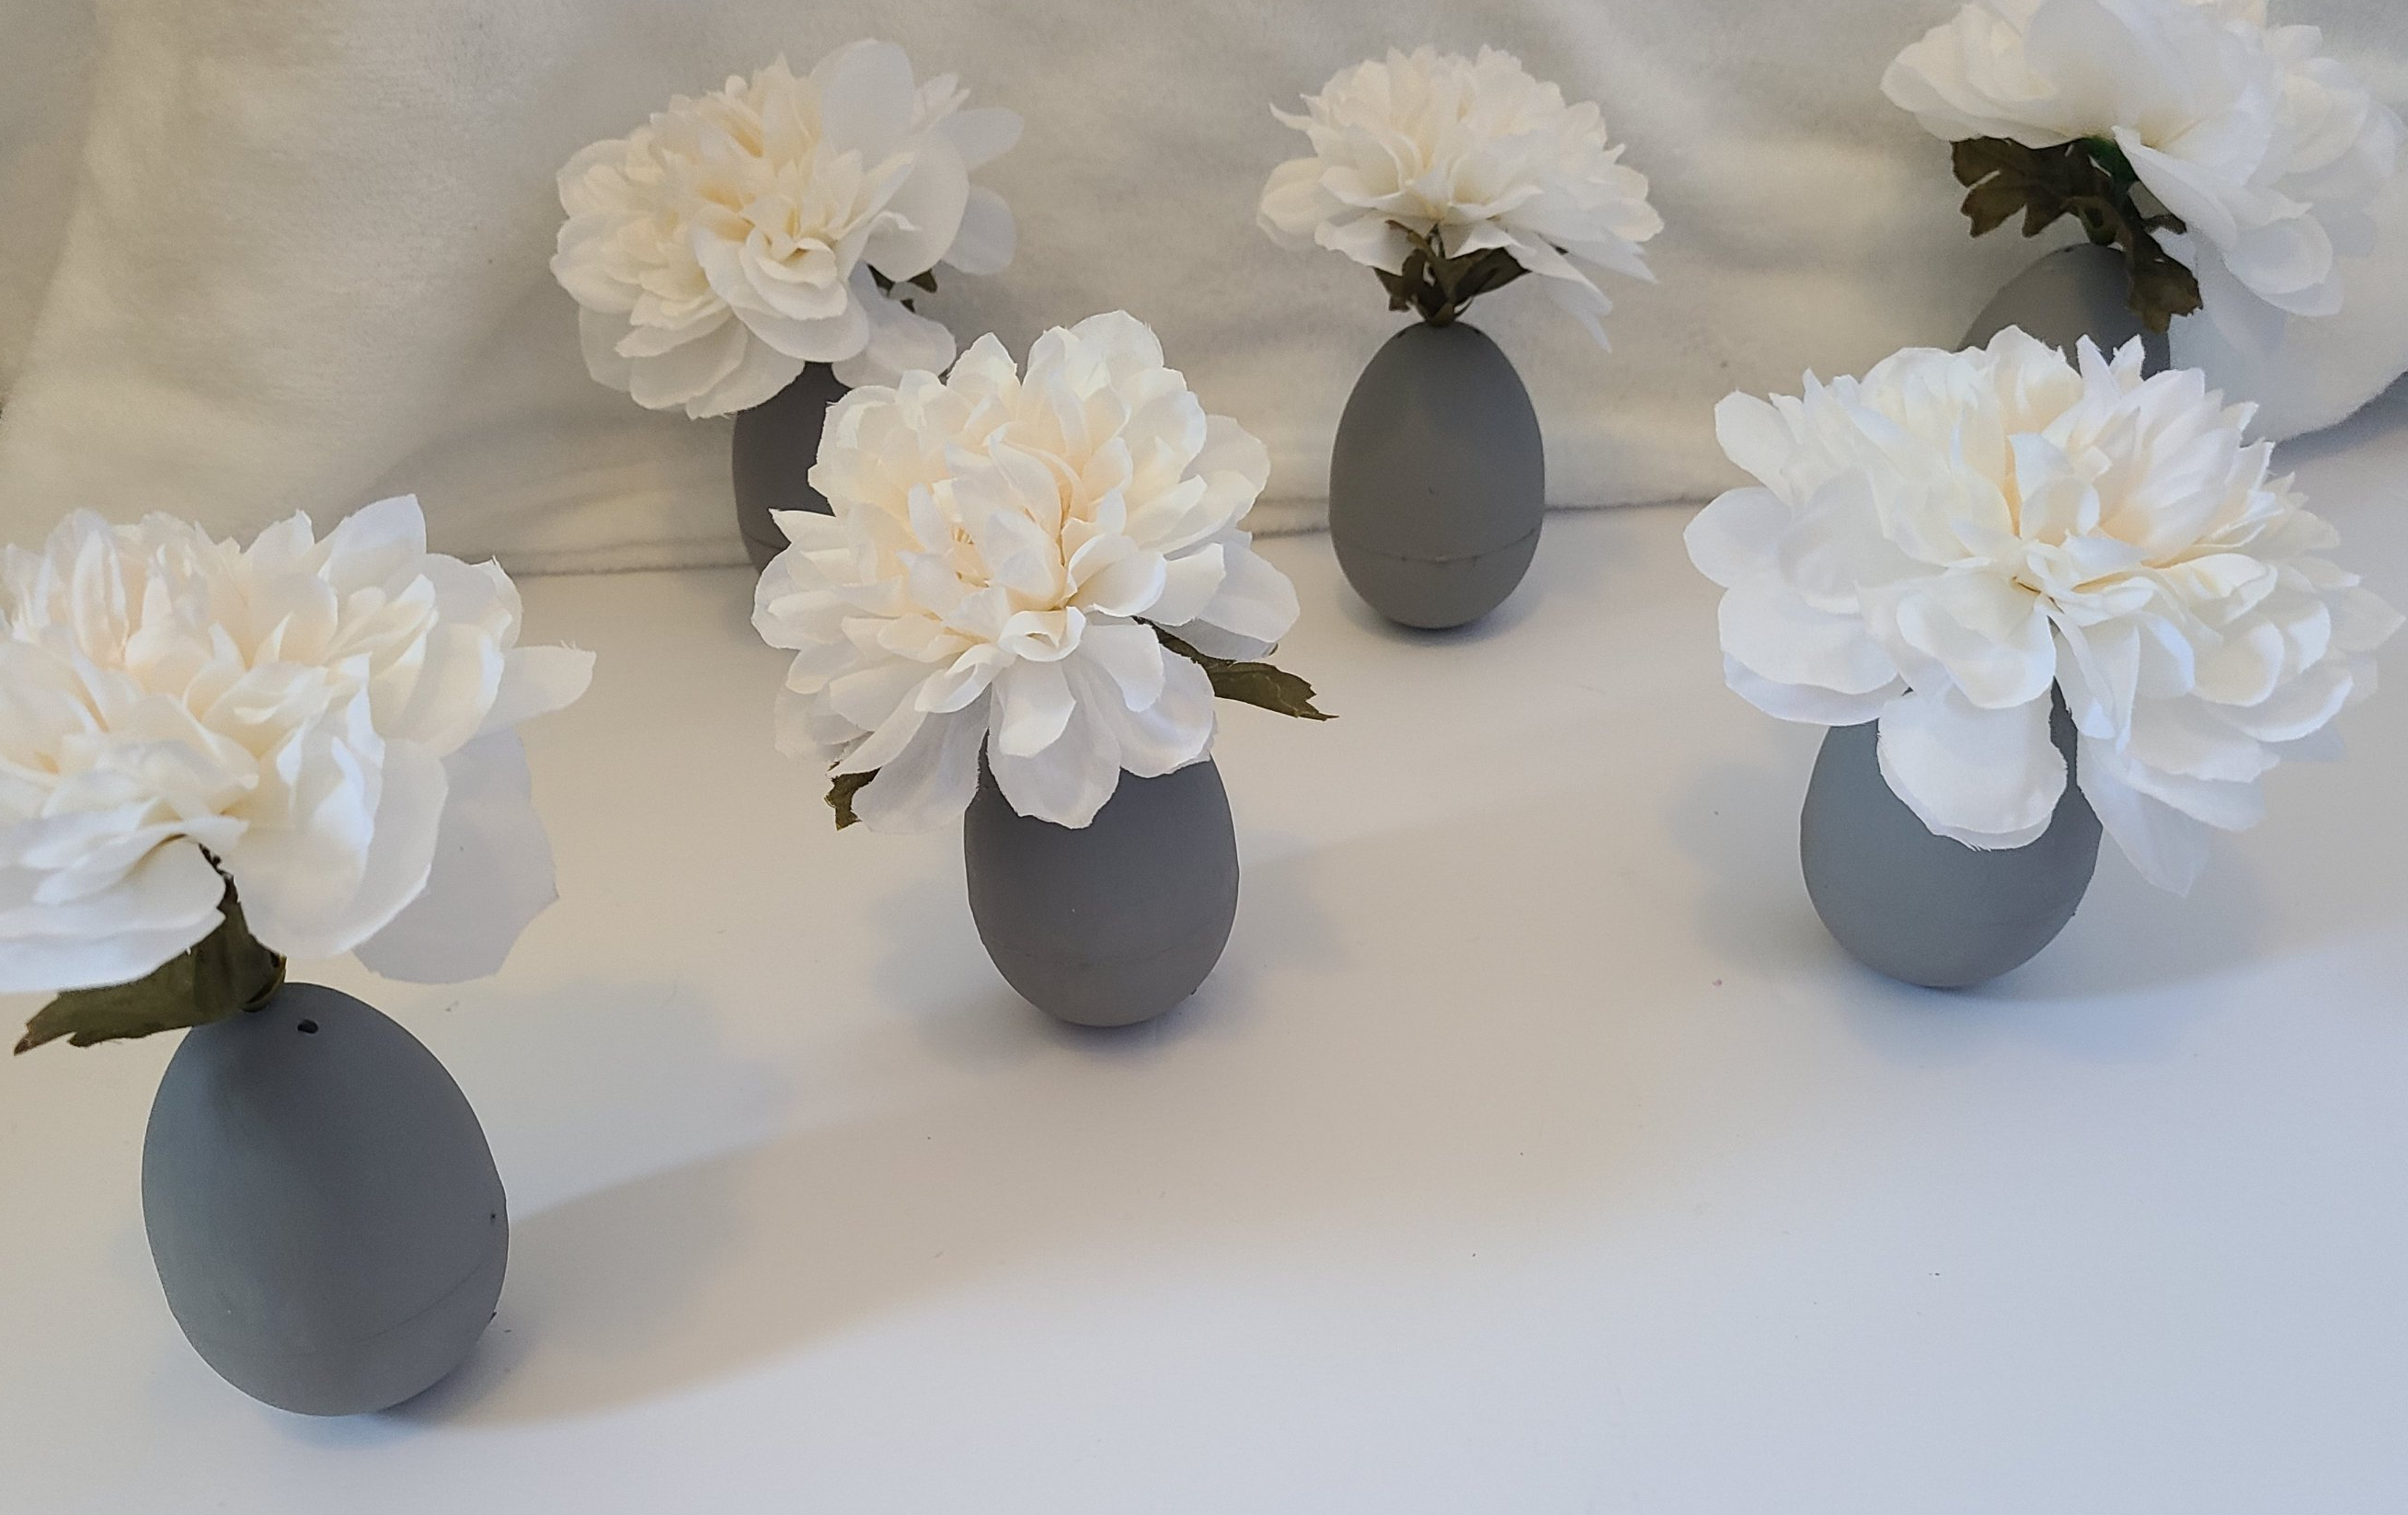 Set of 6 Easter egg vases with white flowers and gray painted eggs.